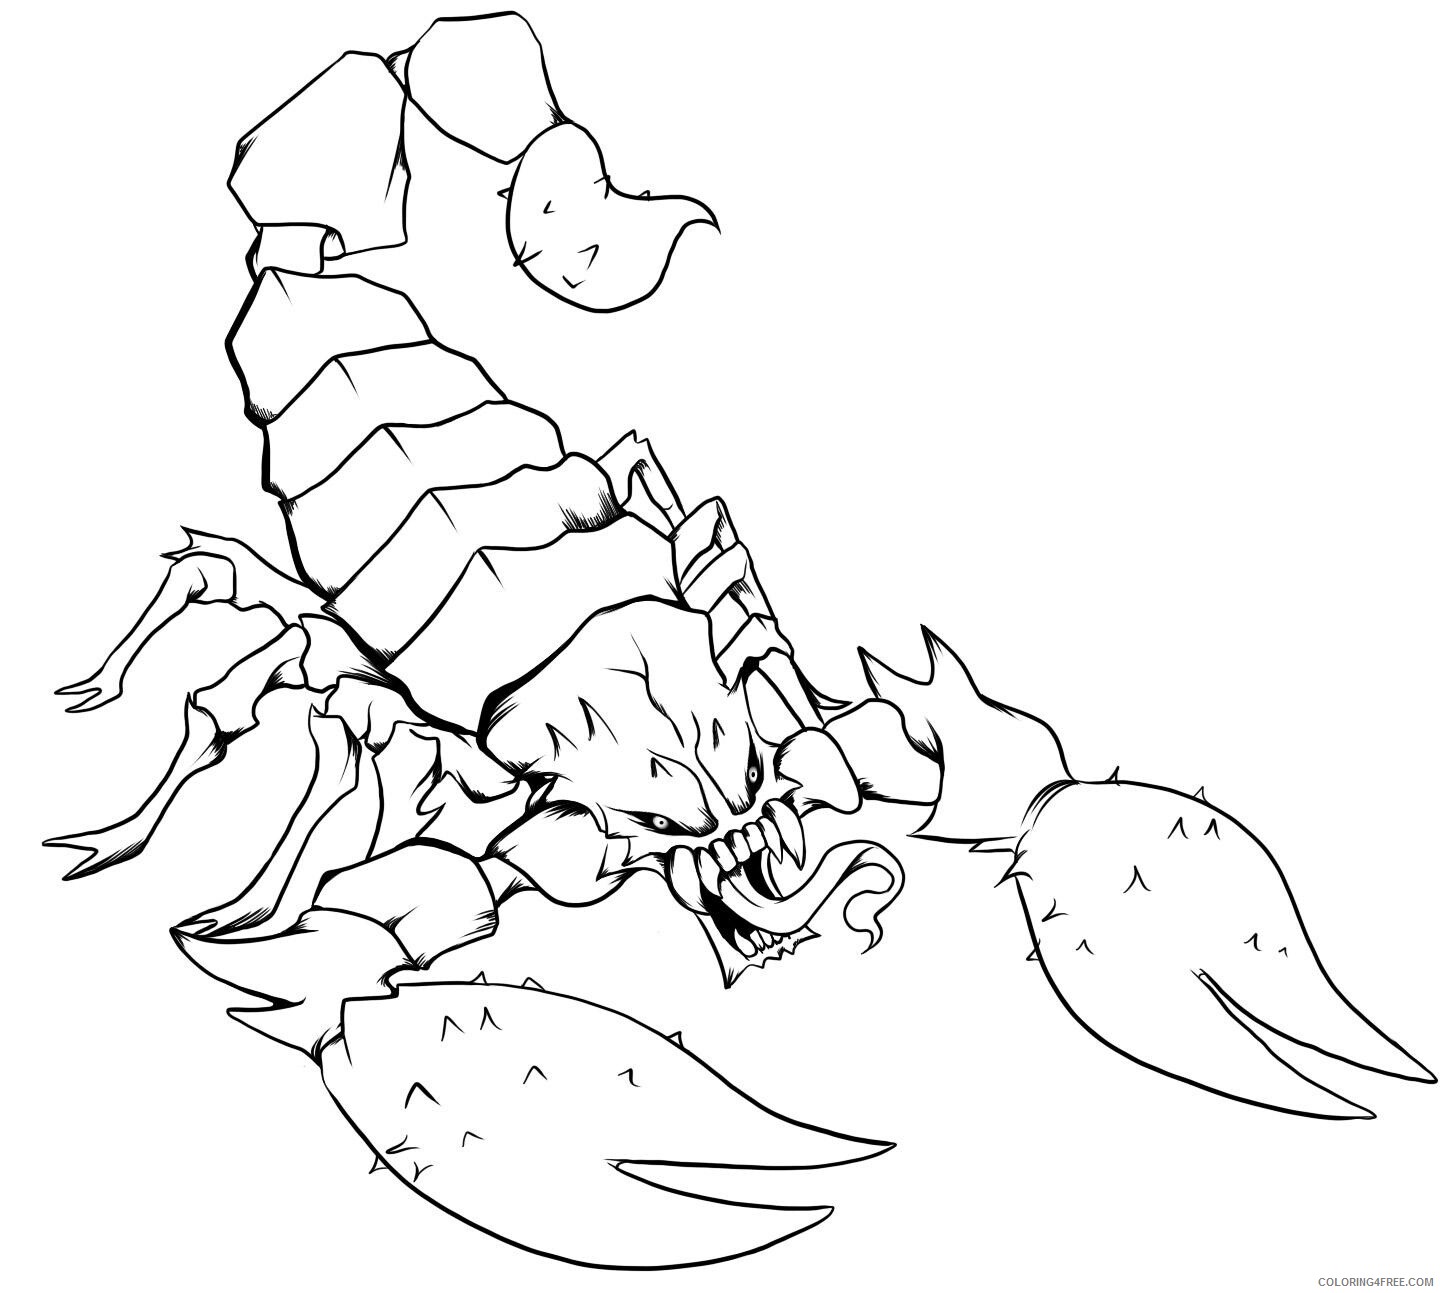 Scorpio Coloring Pages Animal Printable Sheets Scorpion Pictures 2021 4350 Coloring4free